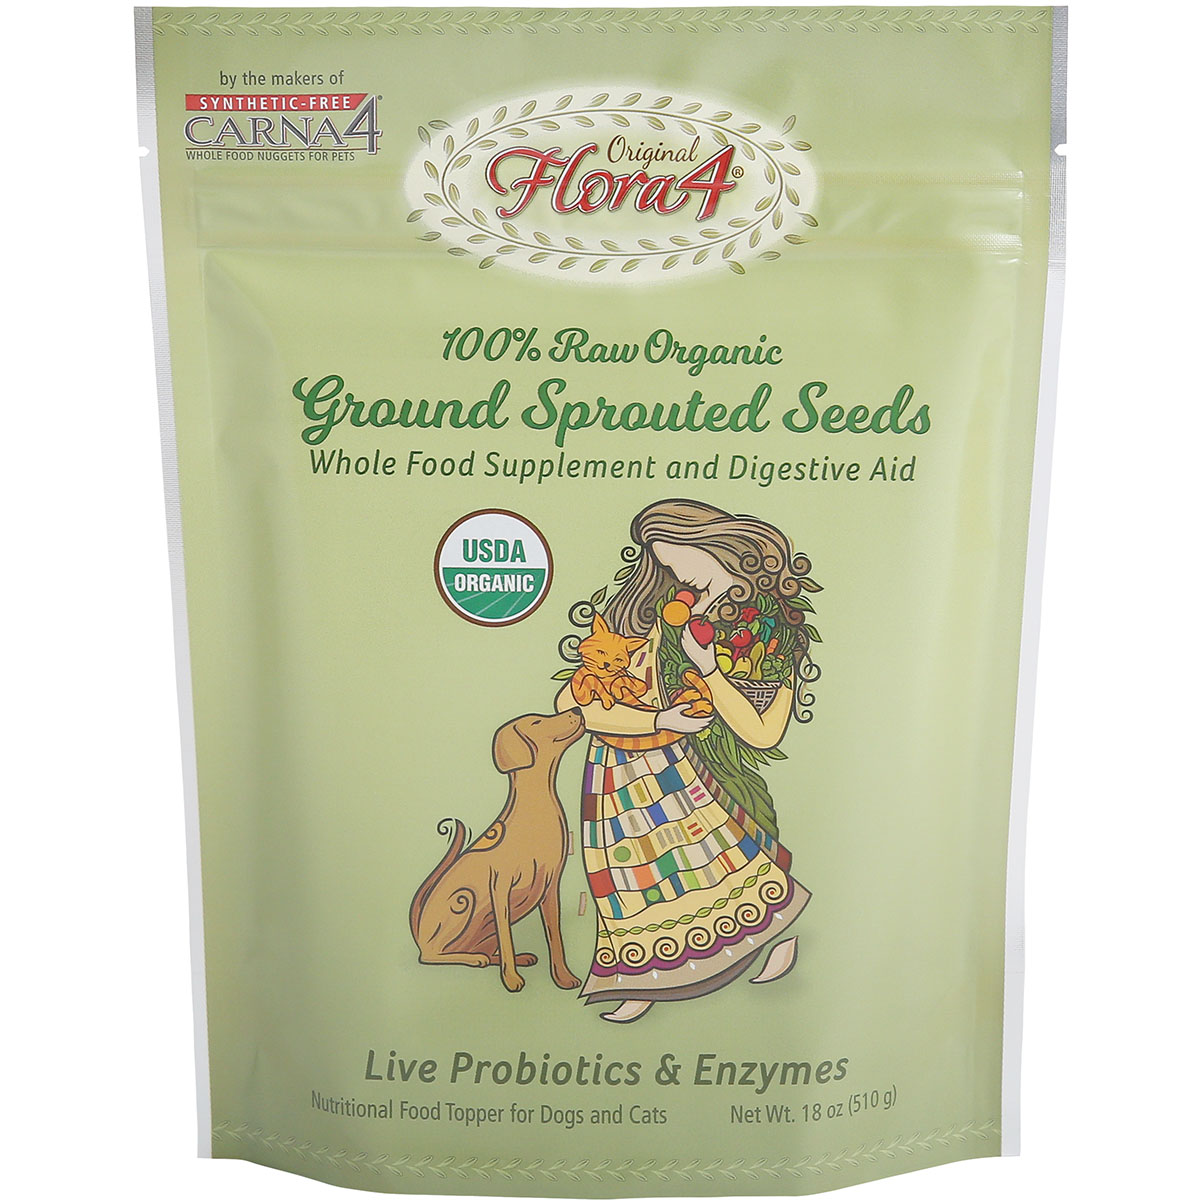 Carna4 Flora4 Ground Sprouted Seeds Dog & Cat Food Topper